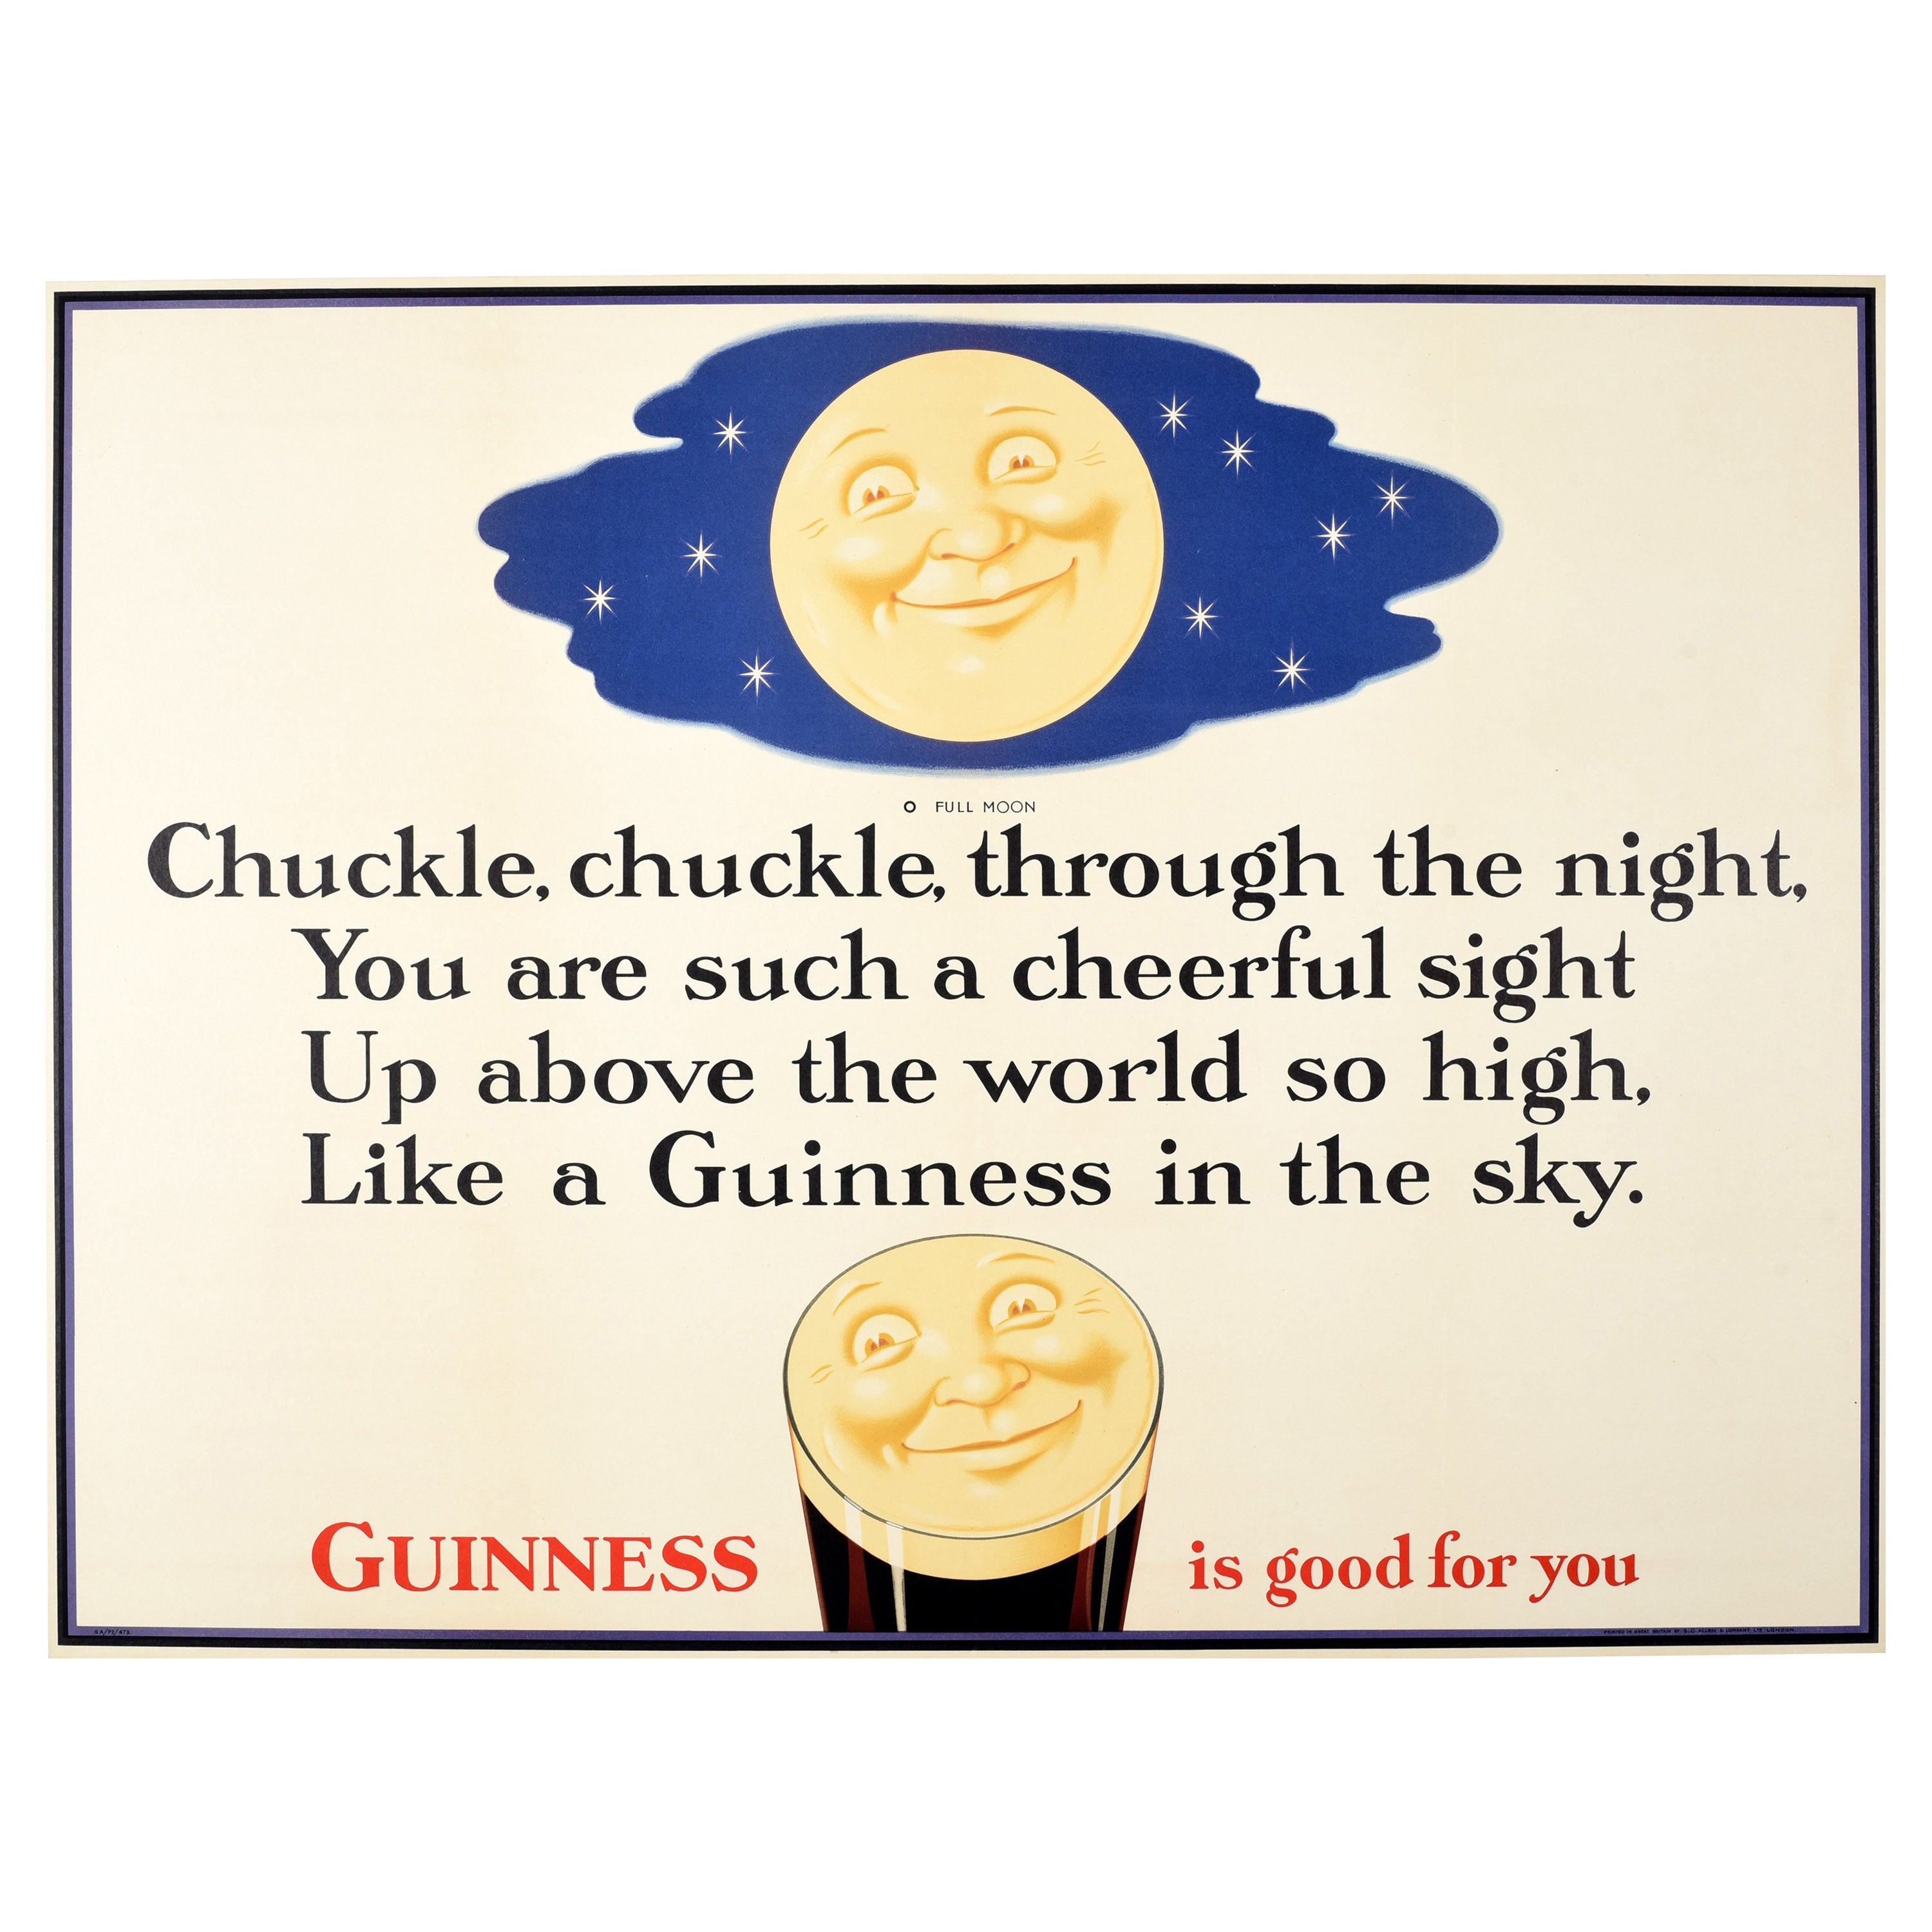 Original Vintage Drink Advertising Poster Guinness Is Good For You Lullaby Art For Sale